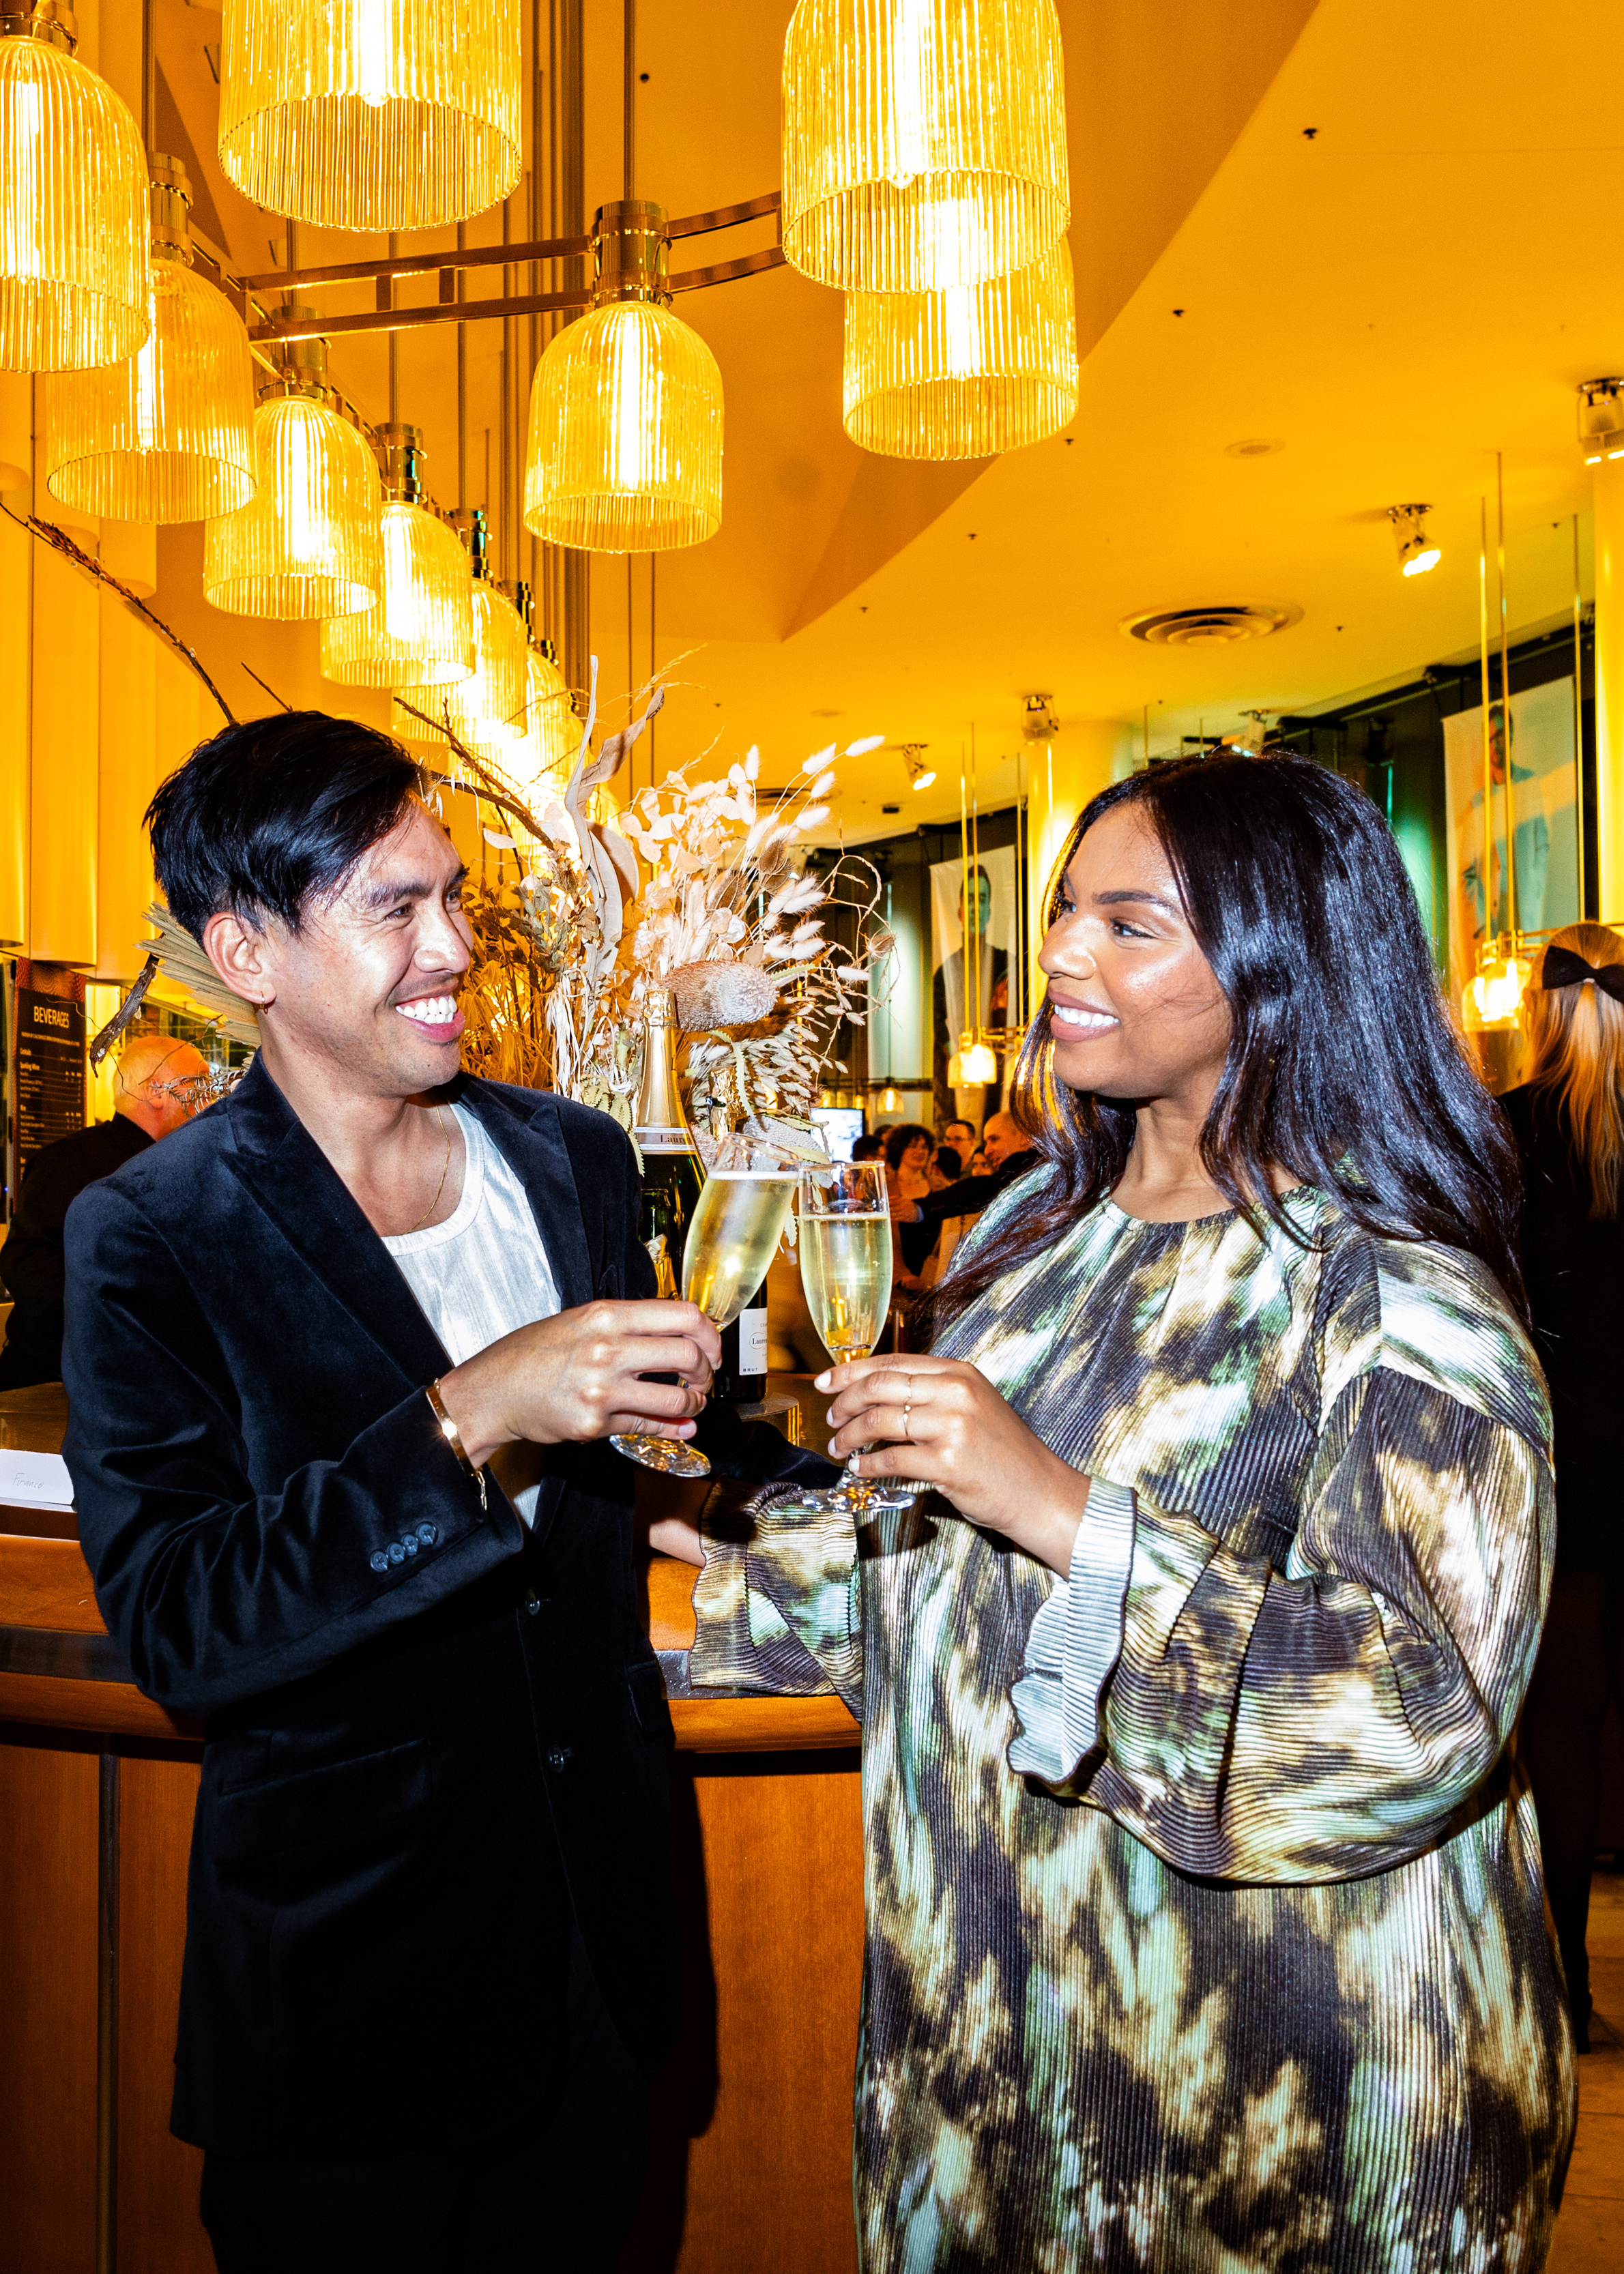 Two people are cheerfully toasting with champagne in an elegant setting with warm lighting.